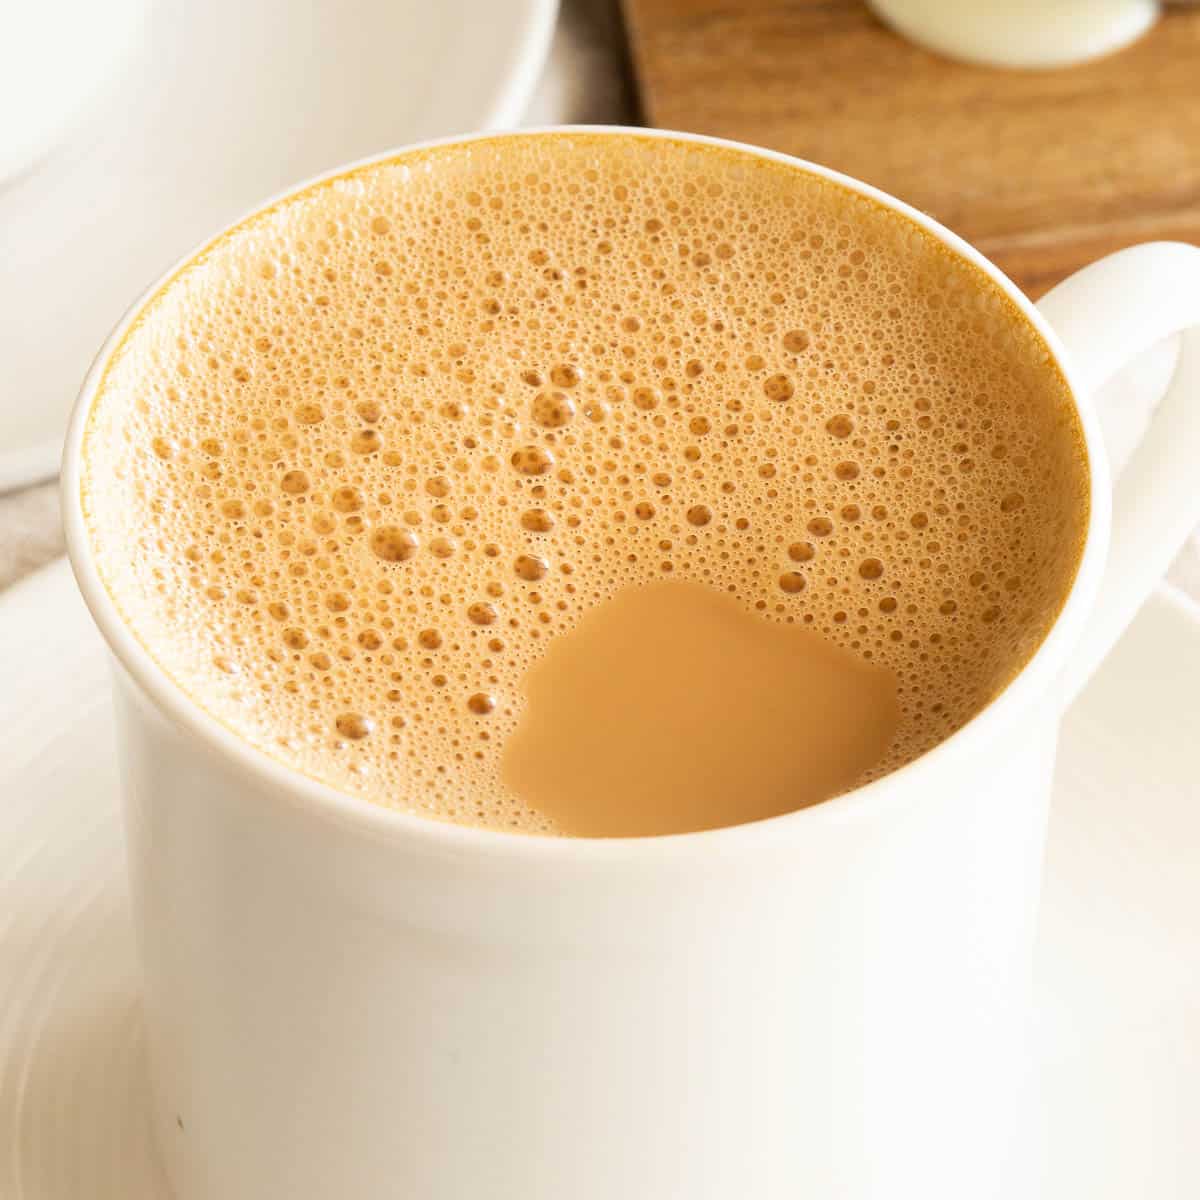 Close up shot of Malaysian pulled coffee in a white mug showing the frothy bubbles on top.